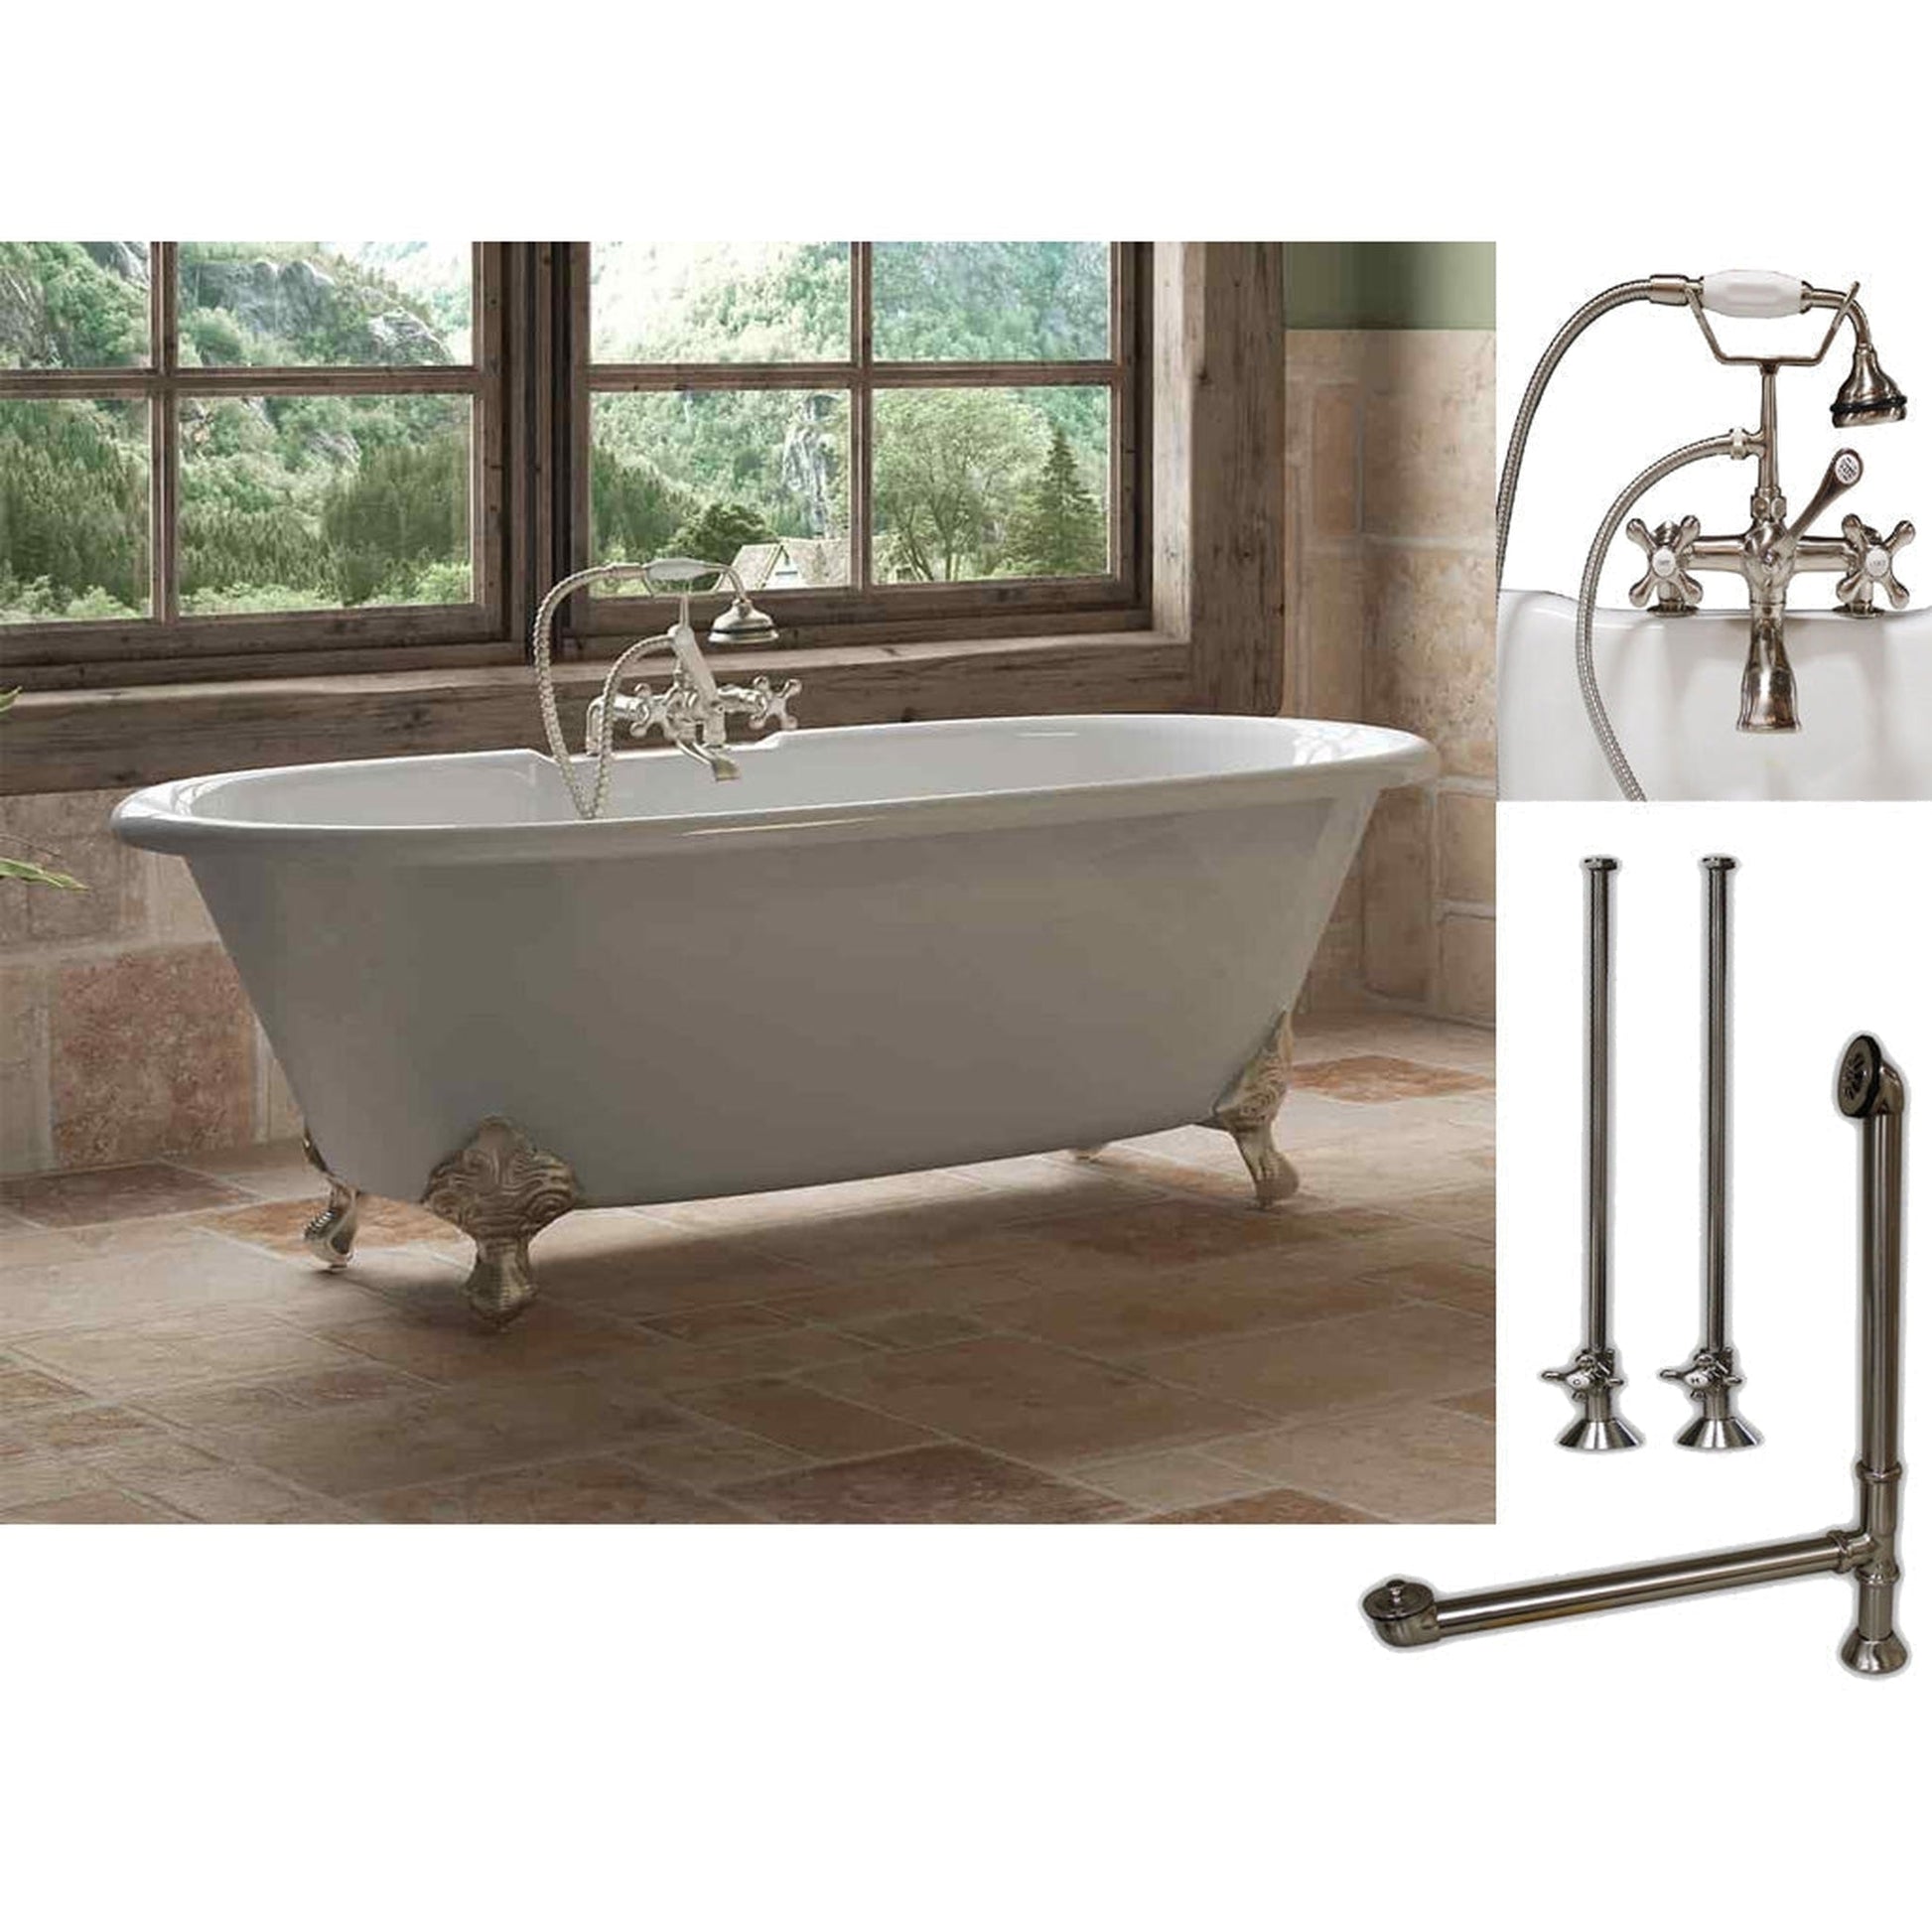 Cambridge Plumbing 67" White Cast Iron Double Ended Clawfoot Bathtub With Deck Holes And Complete Plumbing Package Including 2” Riser Deck Mount Faucet, Supply Lines, Drain And Overflow Assembly In Brushed Nickel